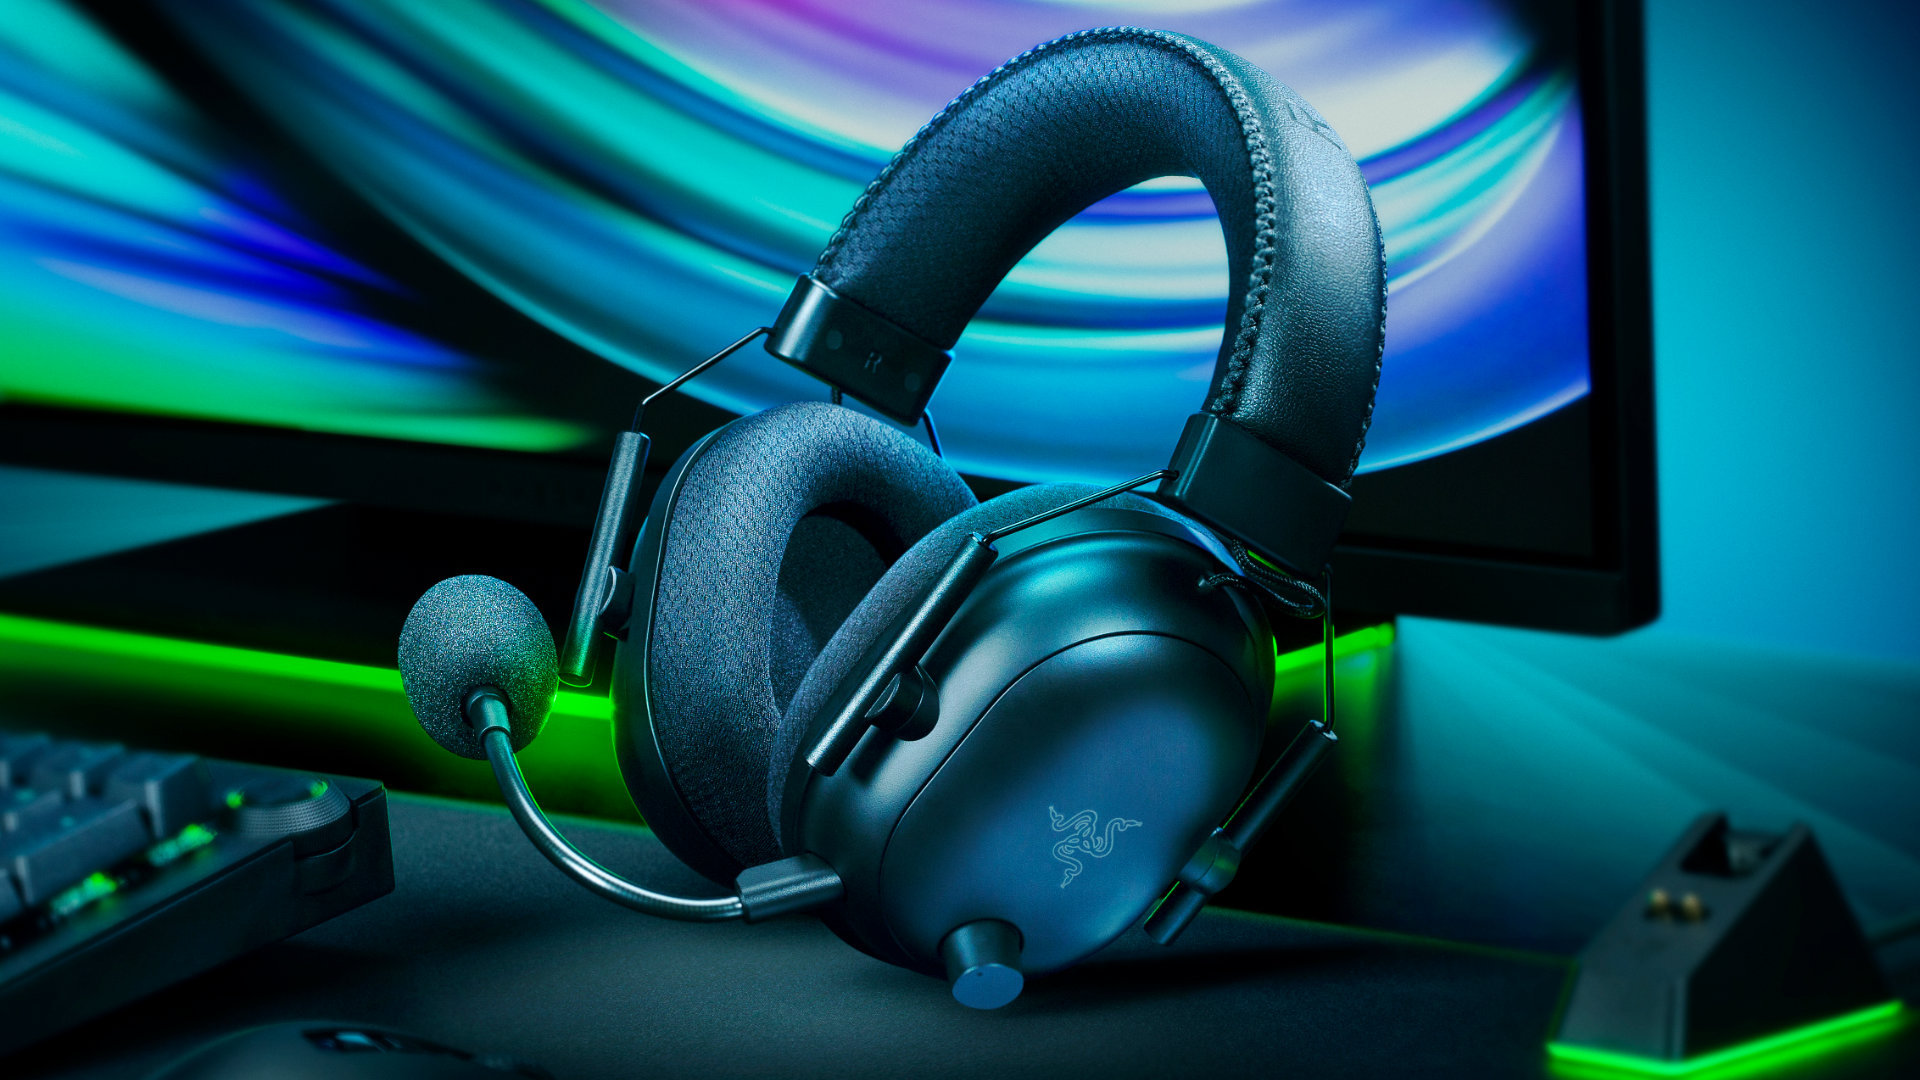 Razer's BlackShark V2 Pro cuts the cord and is the best wireless gaming headset around